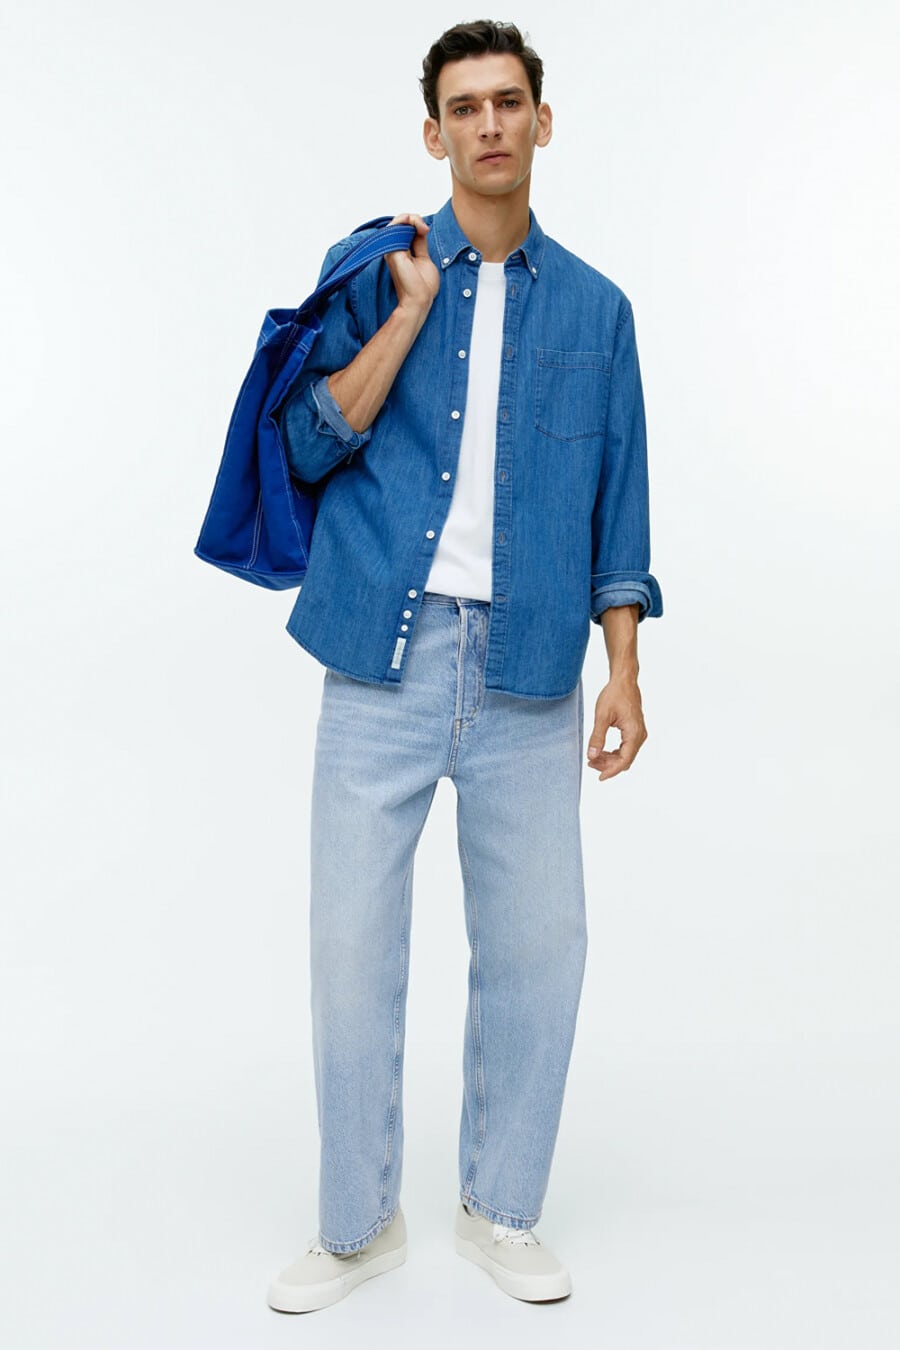 Men's baggy light wash jeans, white T-shirt, open blue denim shirt, blue tote bag and off-white canvas skate shoes outfit